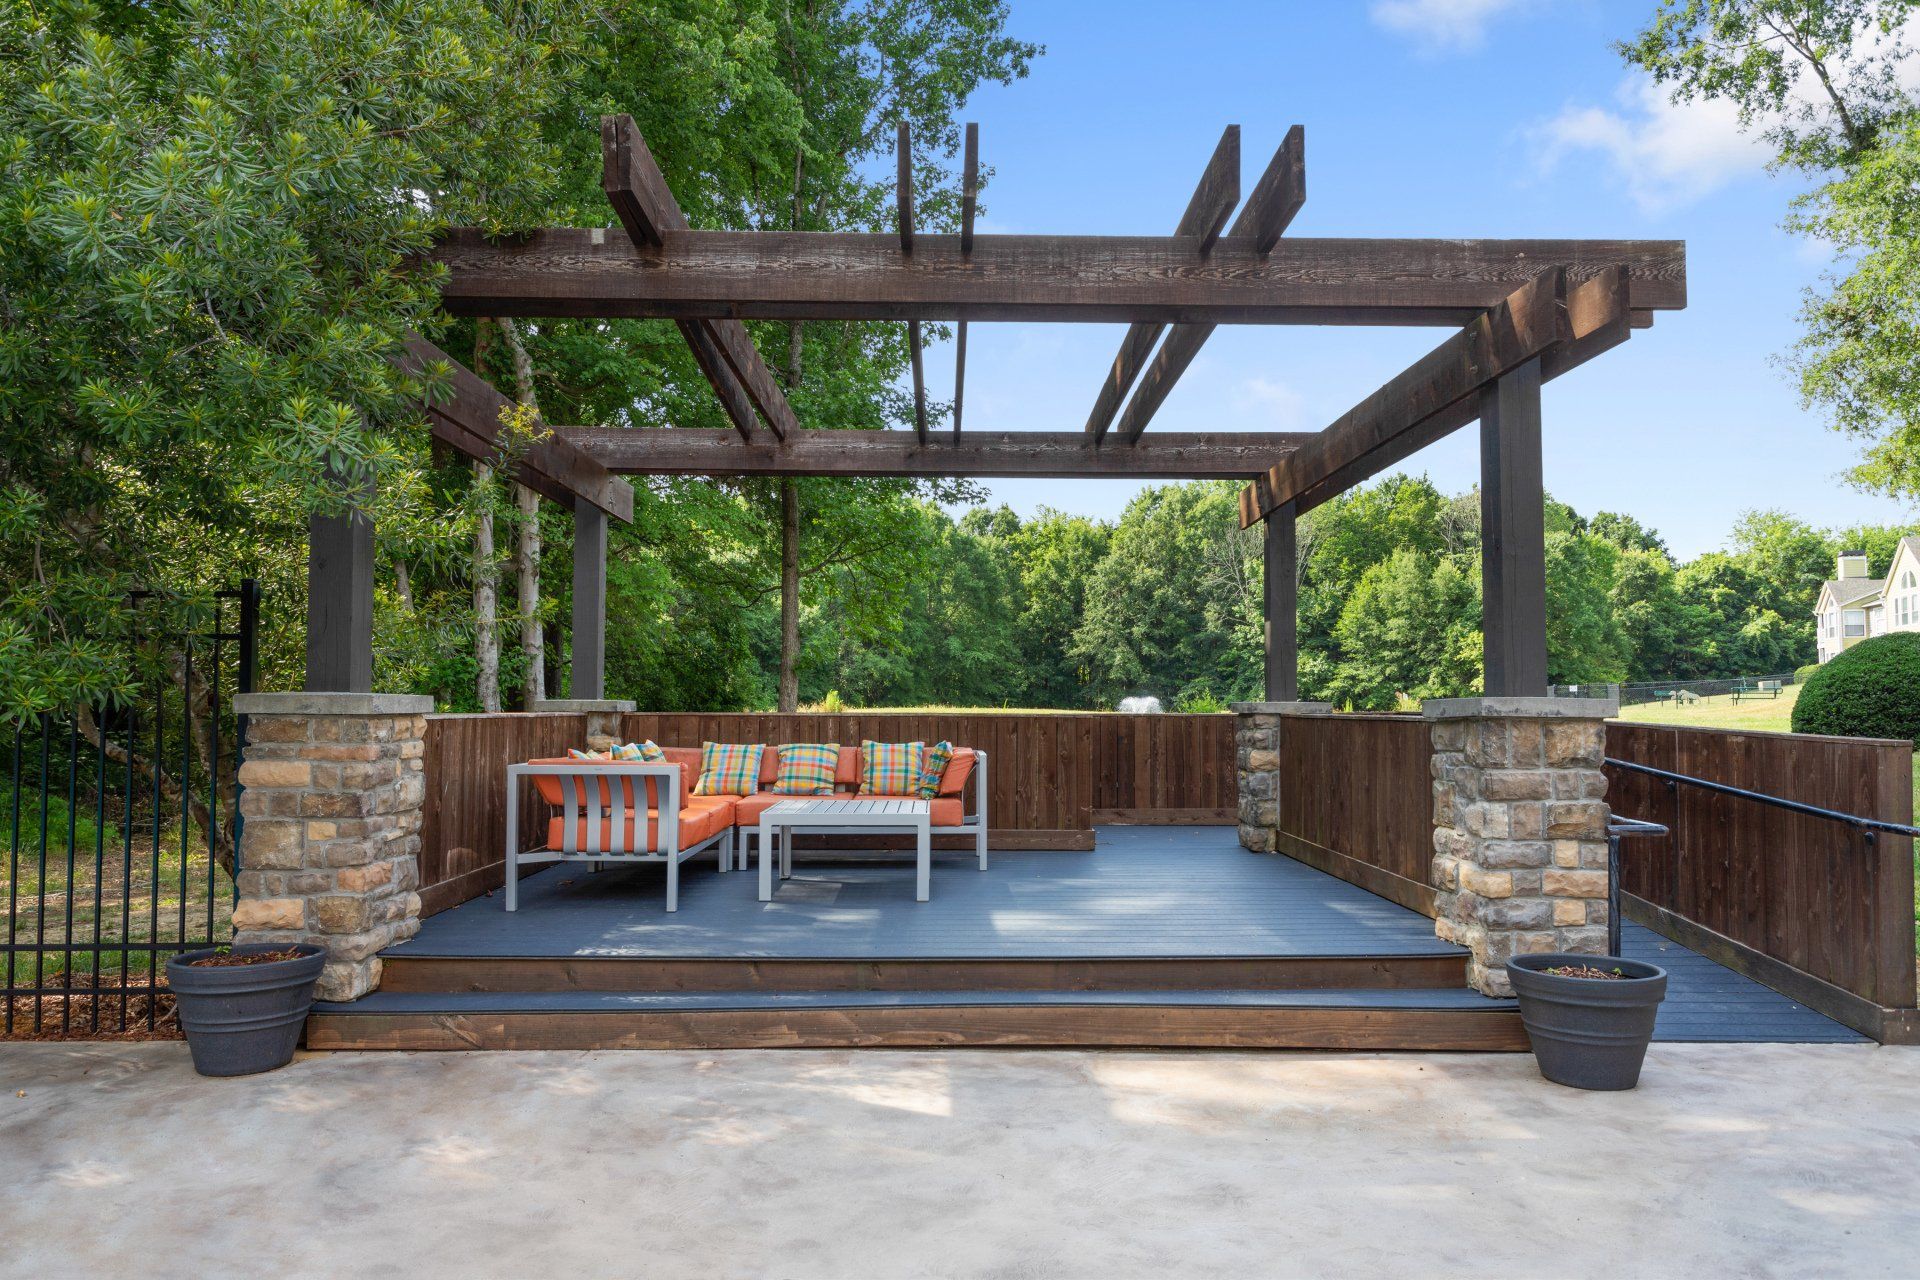 There is a pergola with a couch and a table underneath it Park at Oak Ridge.